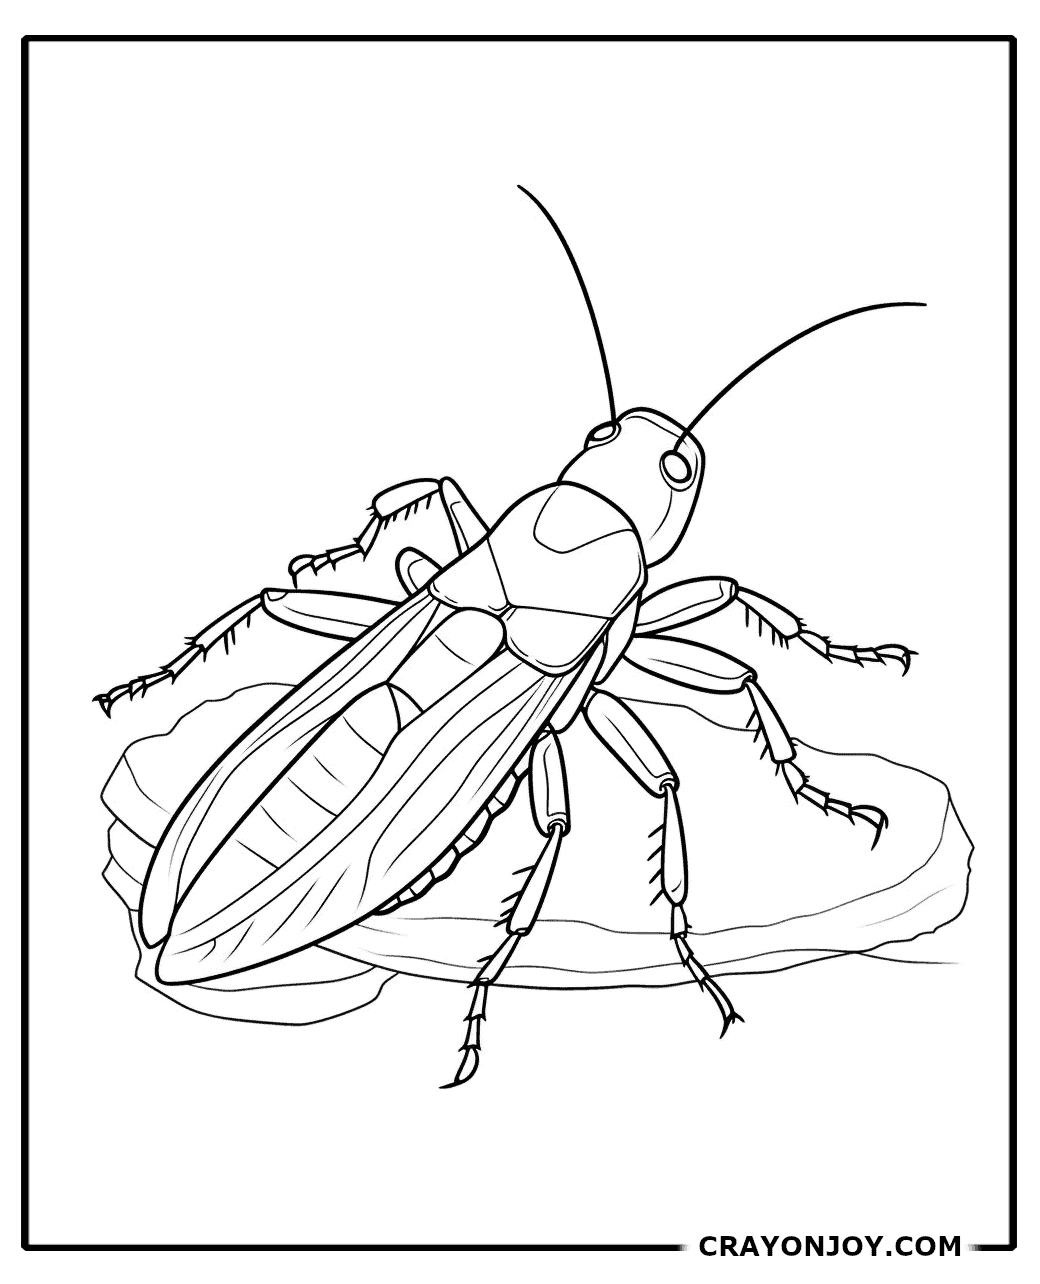 Free Printable Cockroach Coloring Pages for Kids & Adults